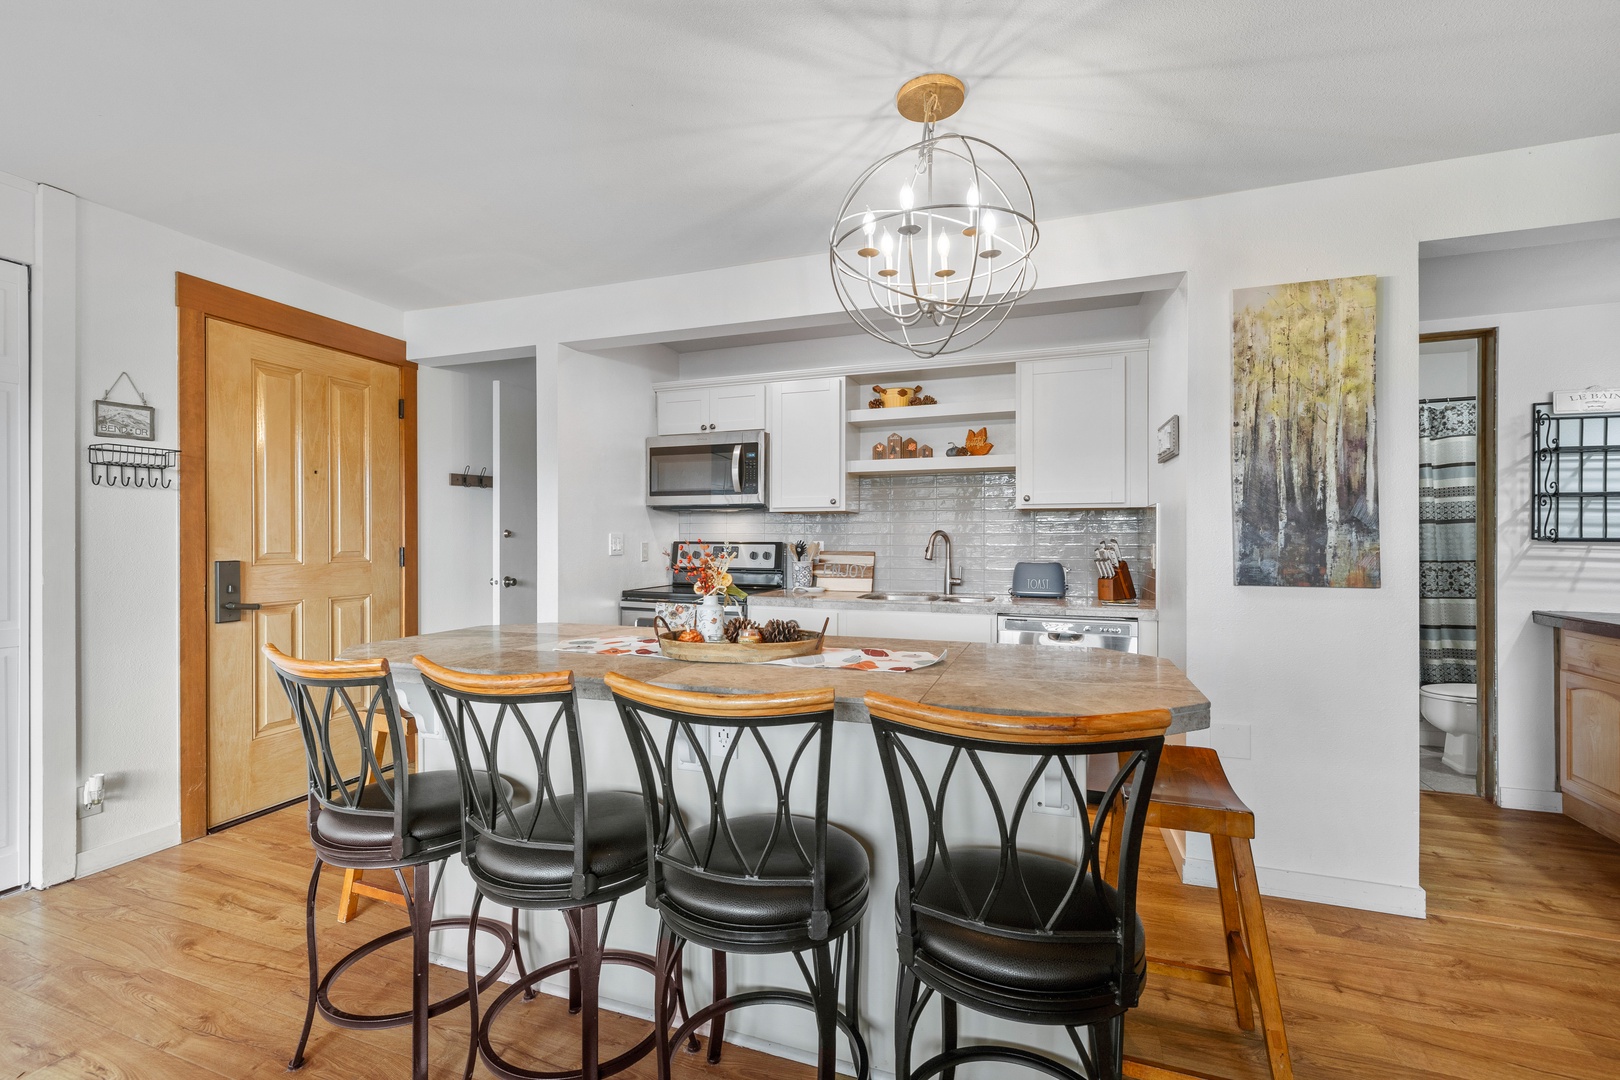 Sip morning coffee or grab a bite at the kitchen counter, with seating for 6